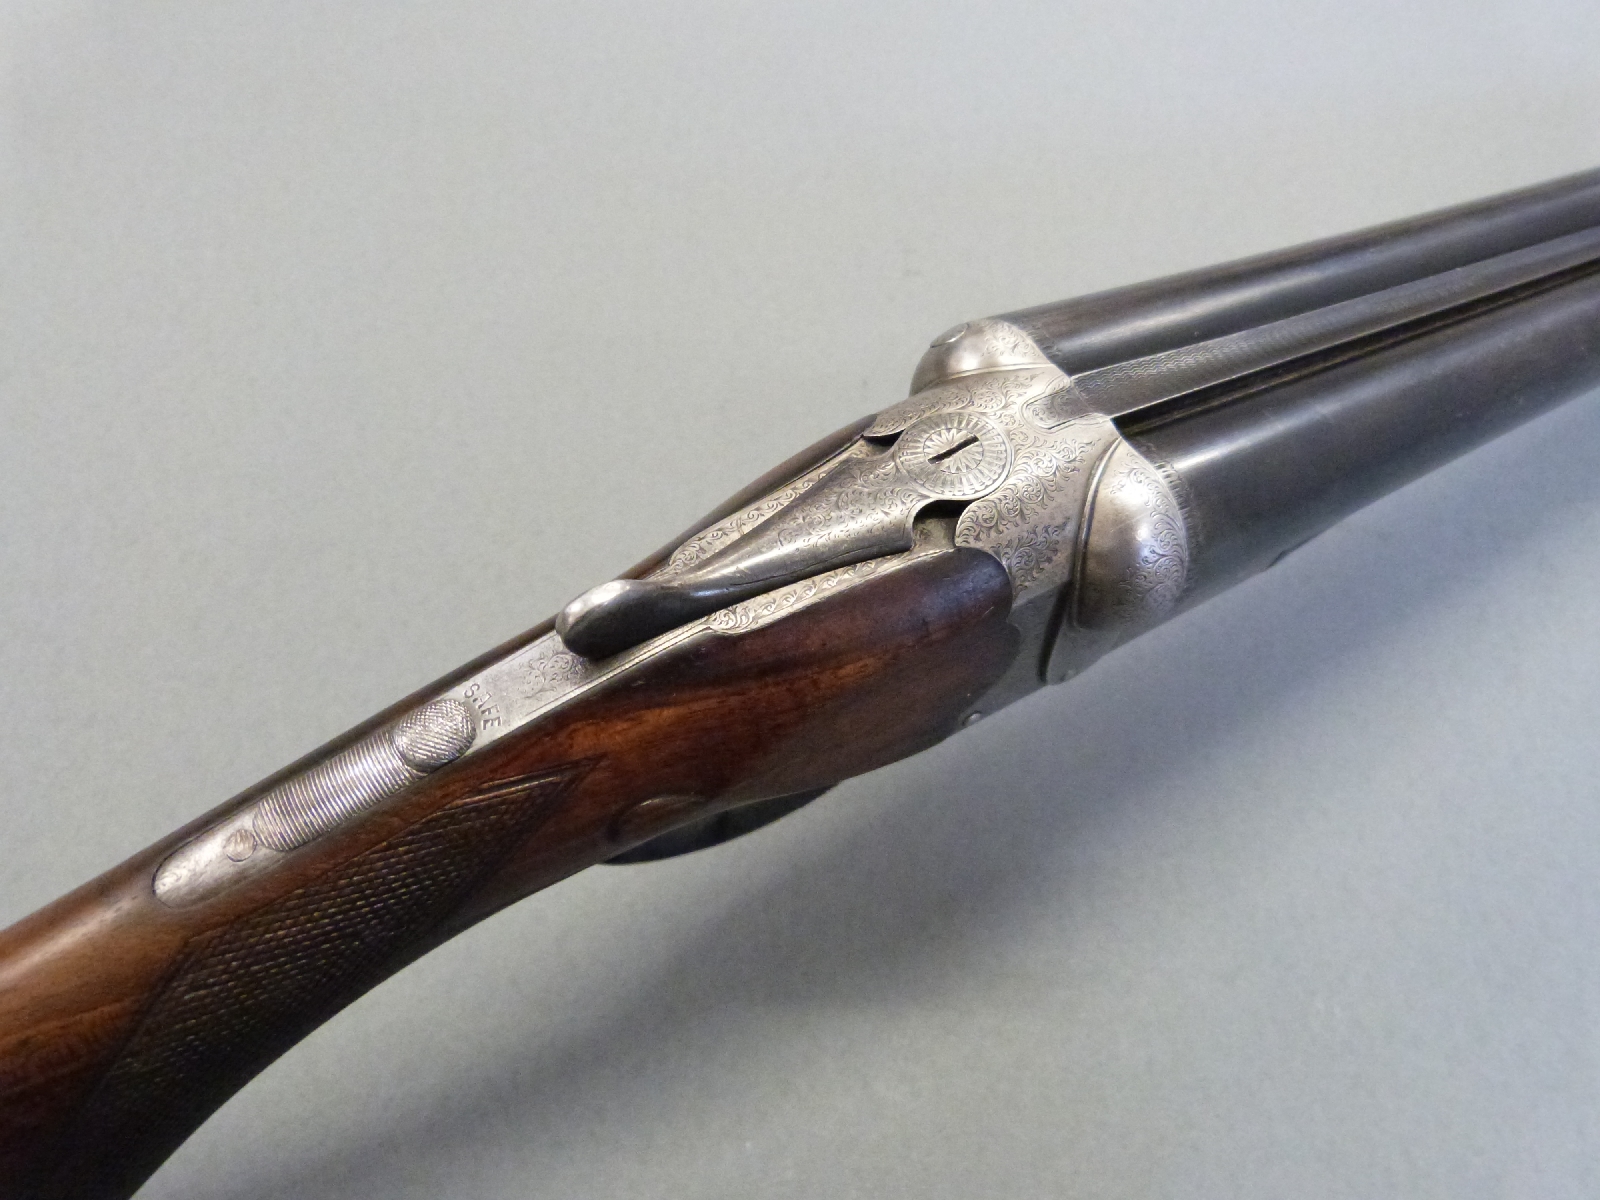 Lincoln Jeffries 12 bore side by side shotgun with ornate engraving to the shaped locks, top plate, - Image 8 of 13